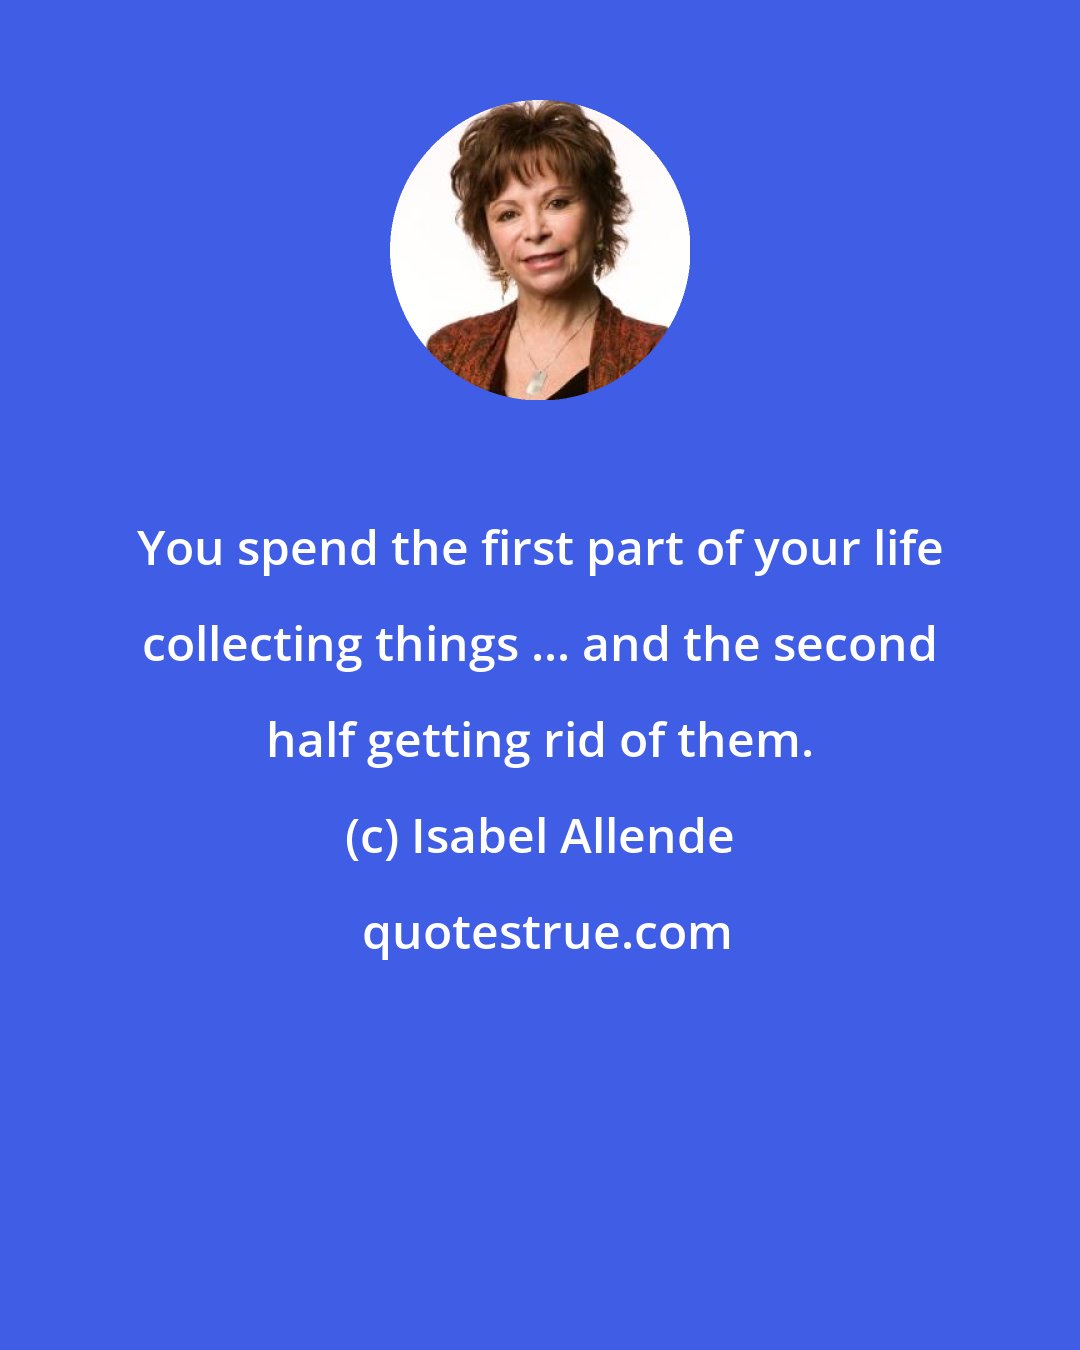 Isabel Allende: You spend the first part of your life collecting things ... and the second half getting rid of them.